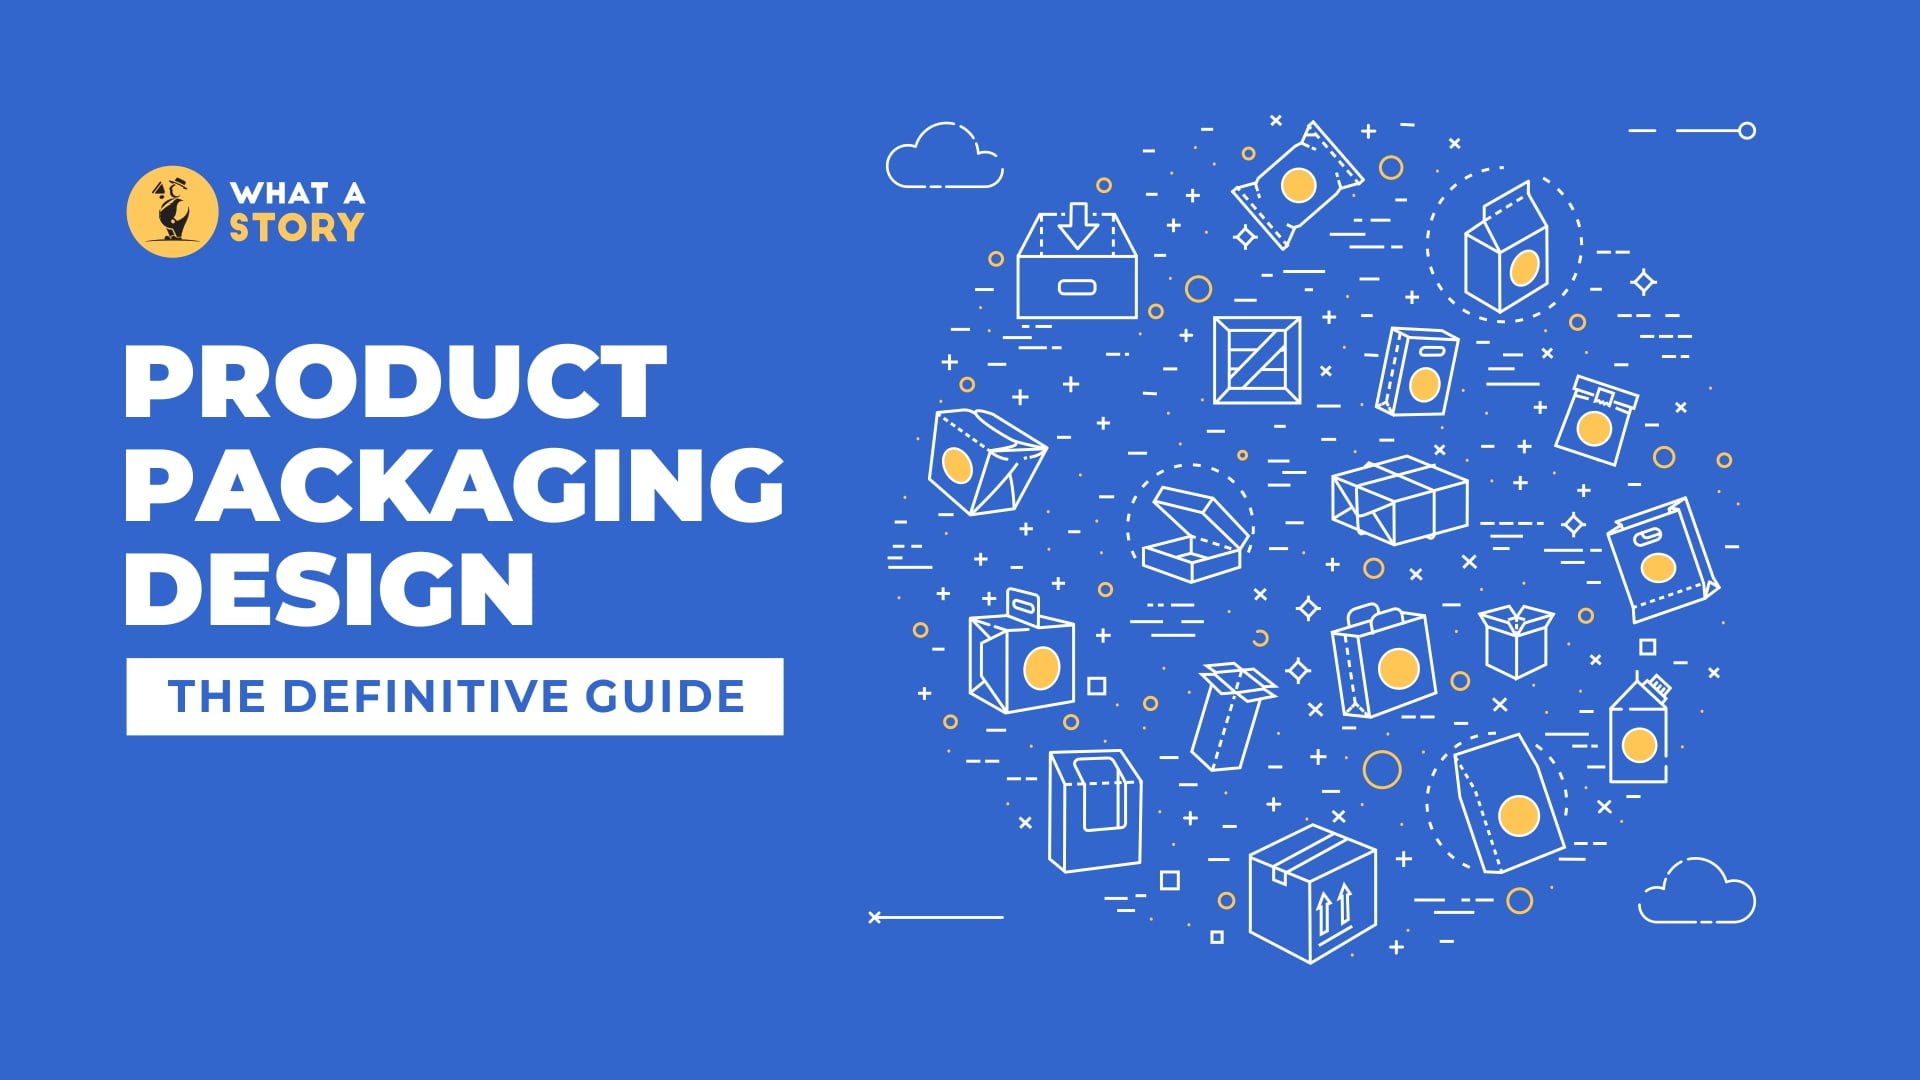 Product Packaging Design: The Definitive Guide